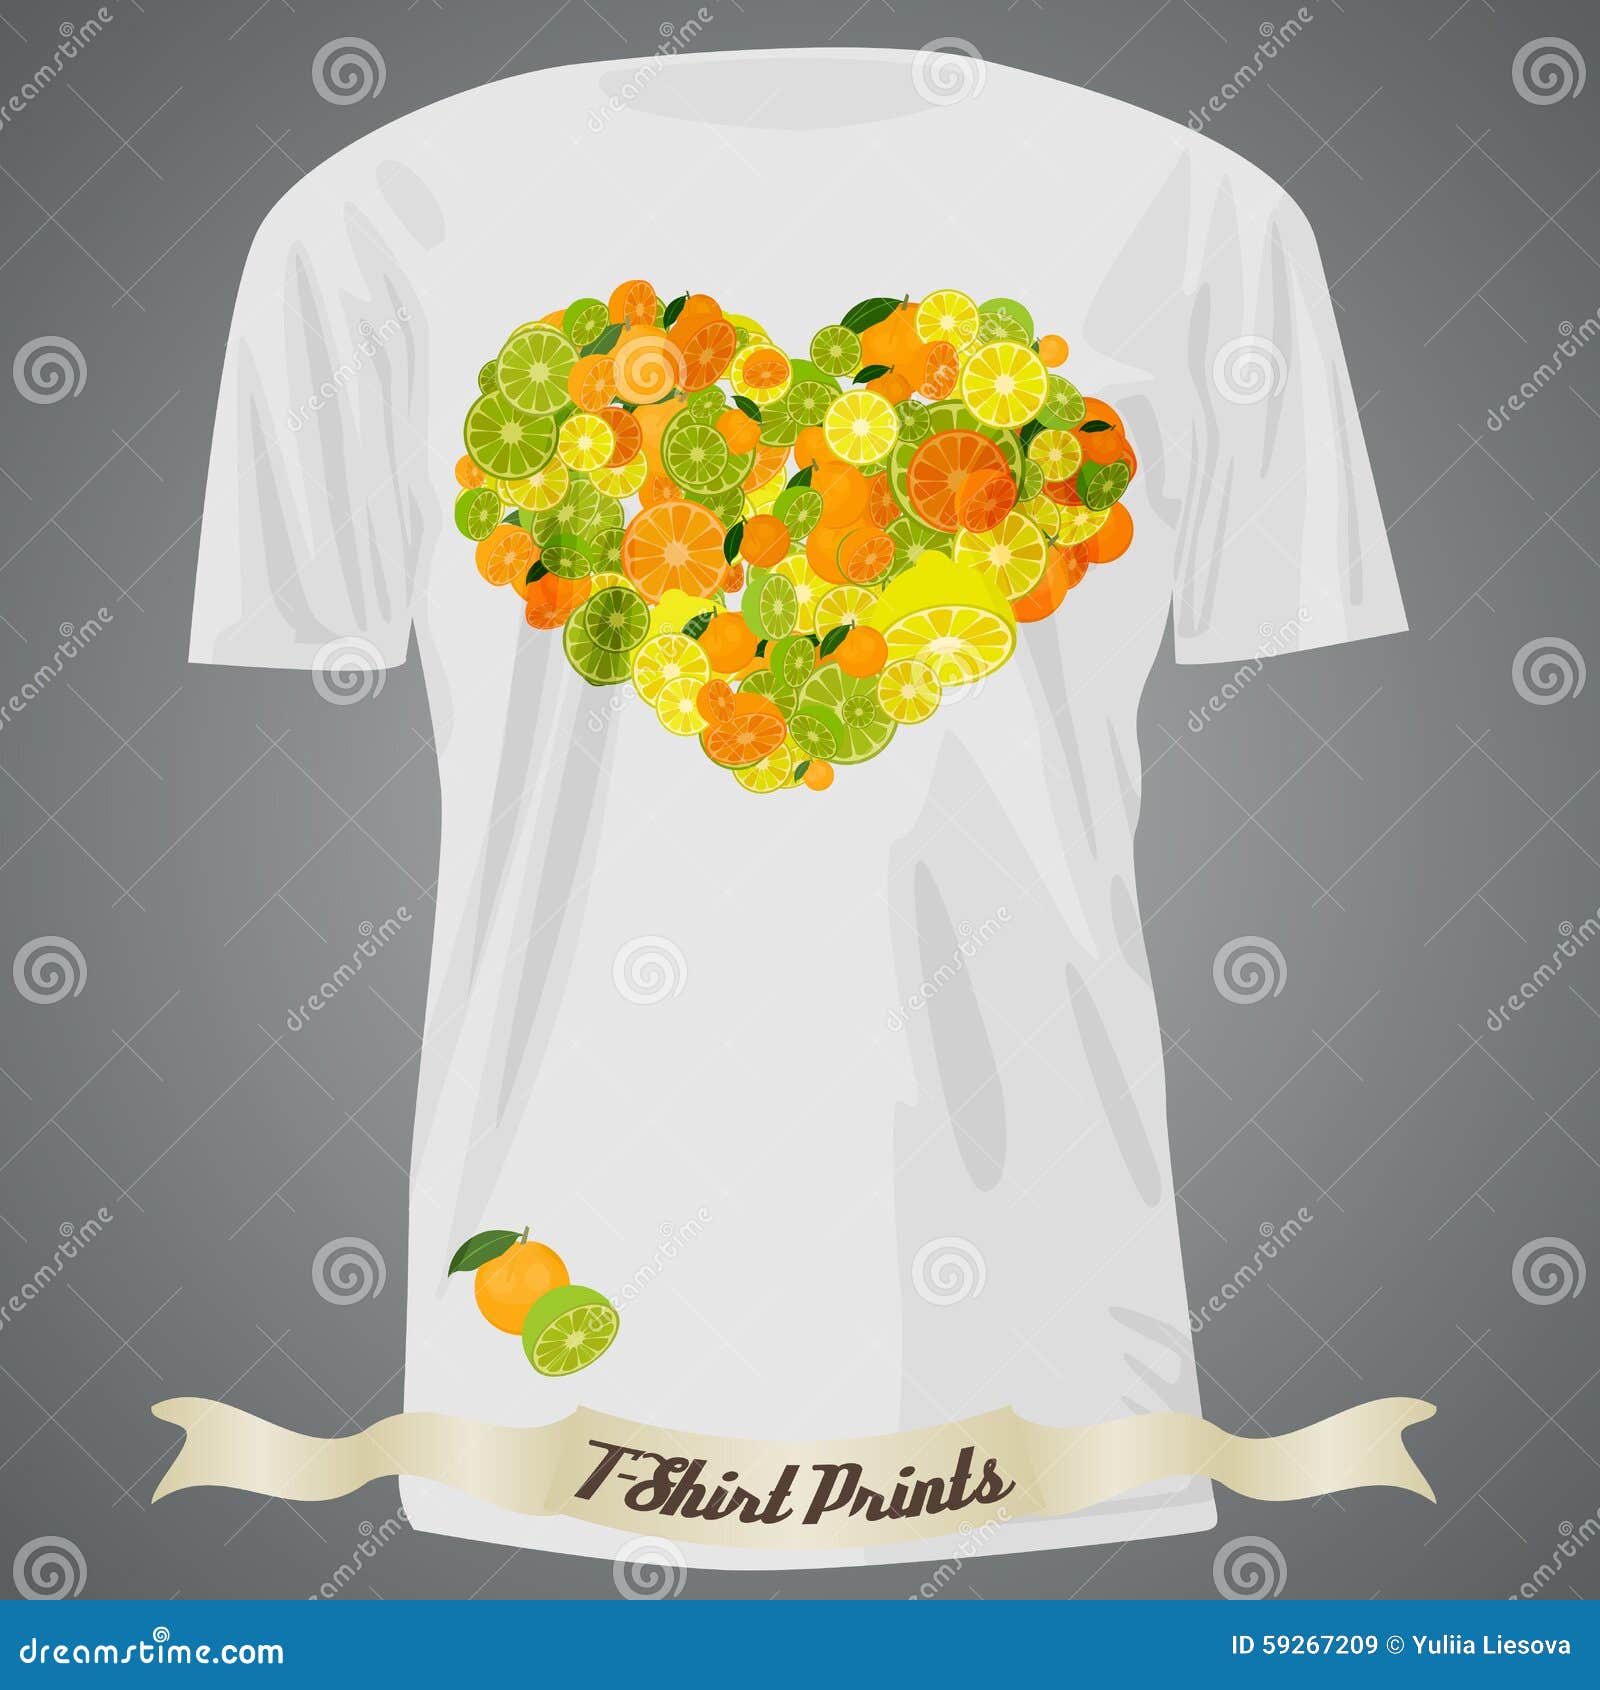 T-shirt design with heart made of citrus, illustration